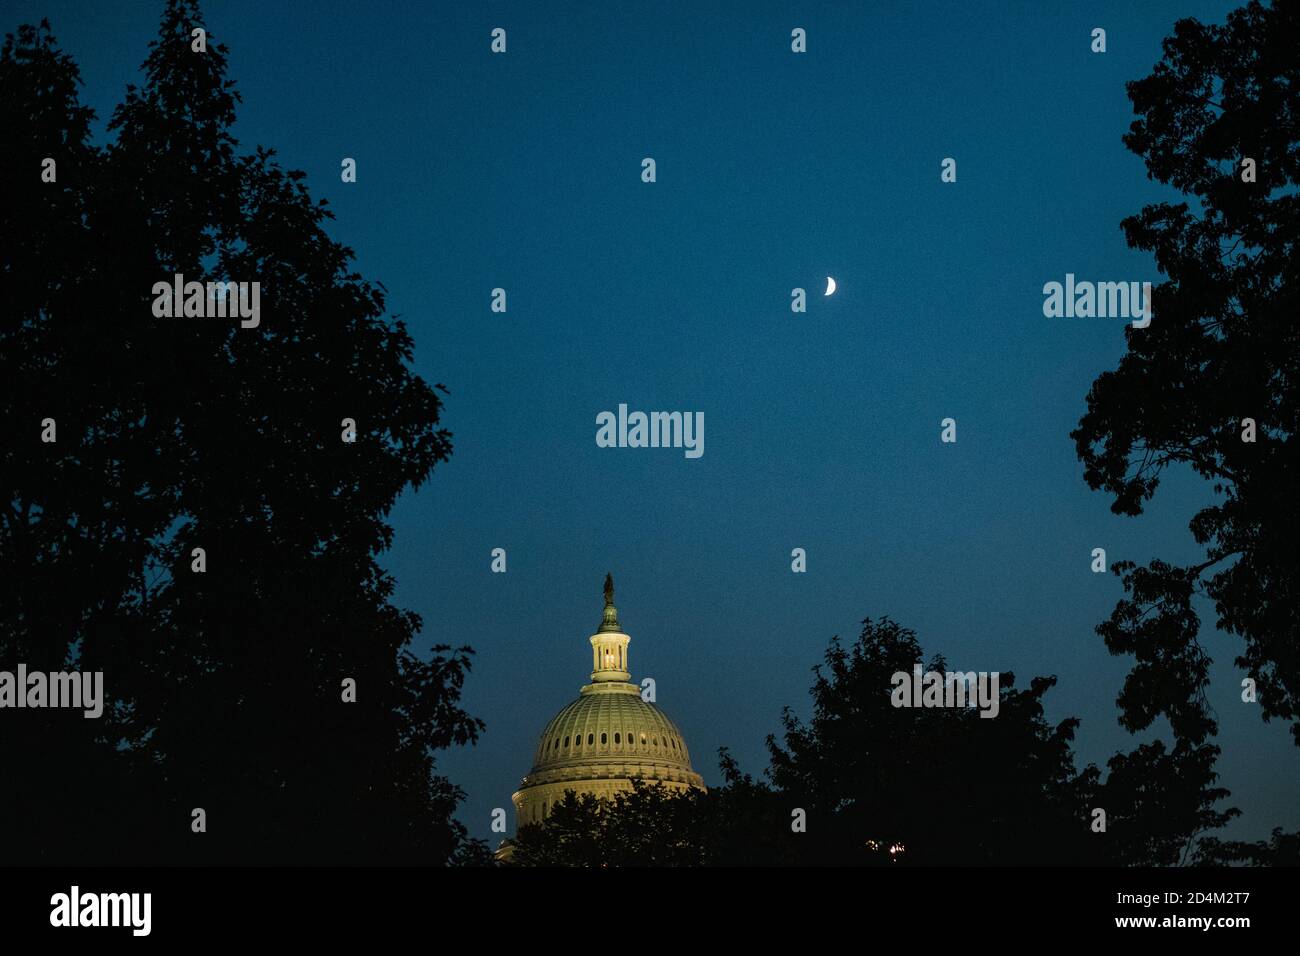 dome of the US capitol building at night Stock Photo